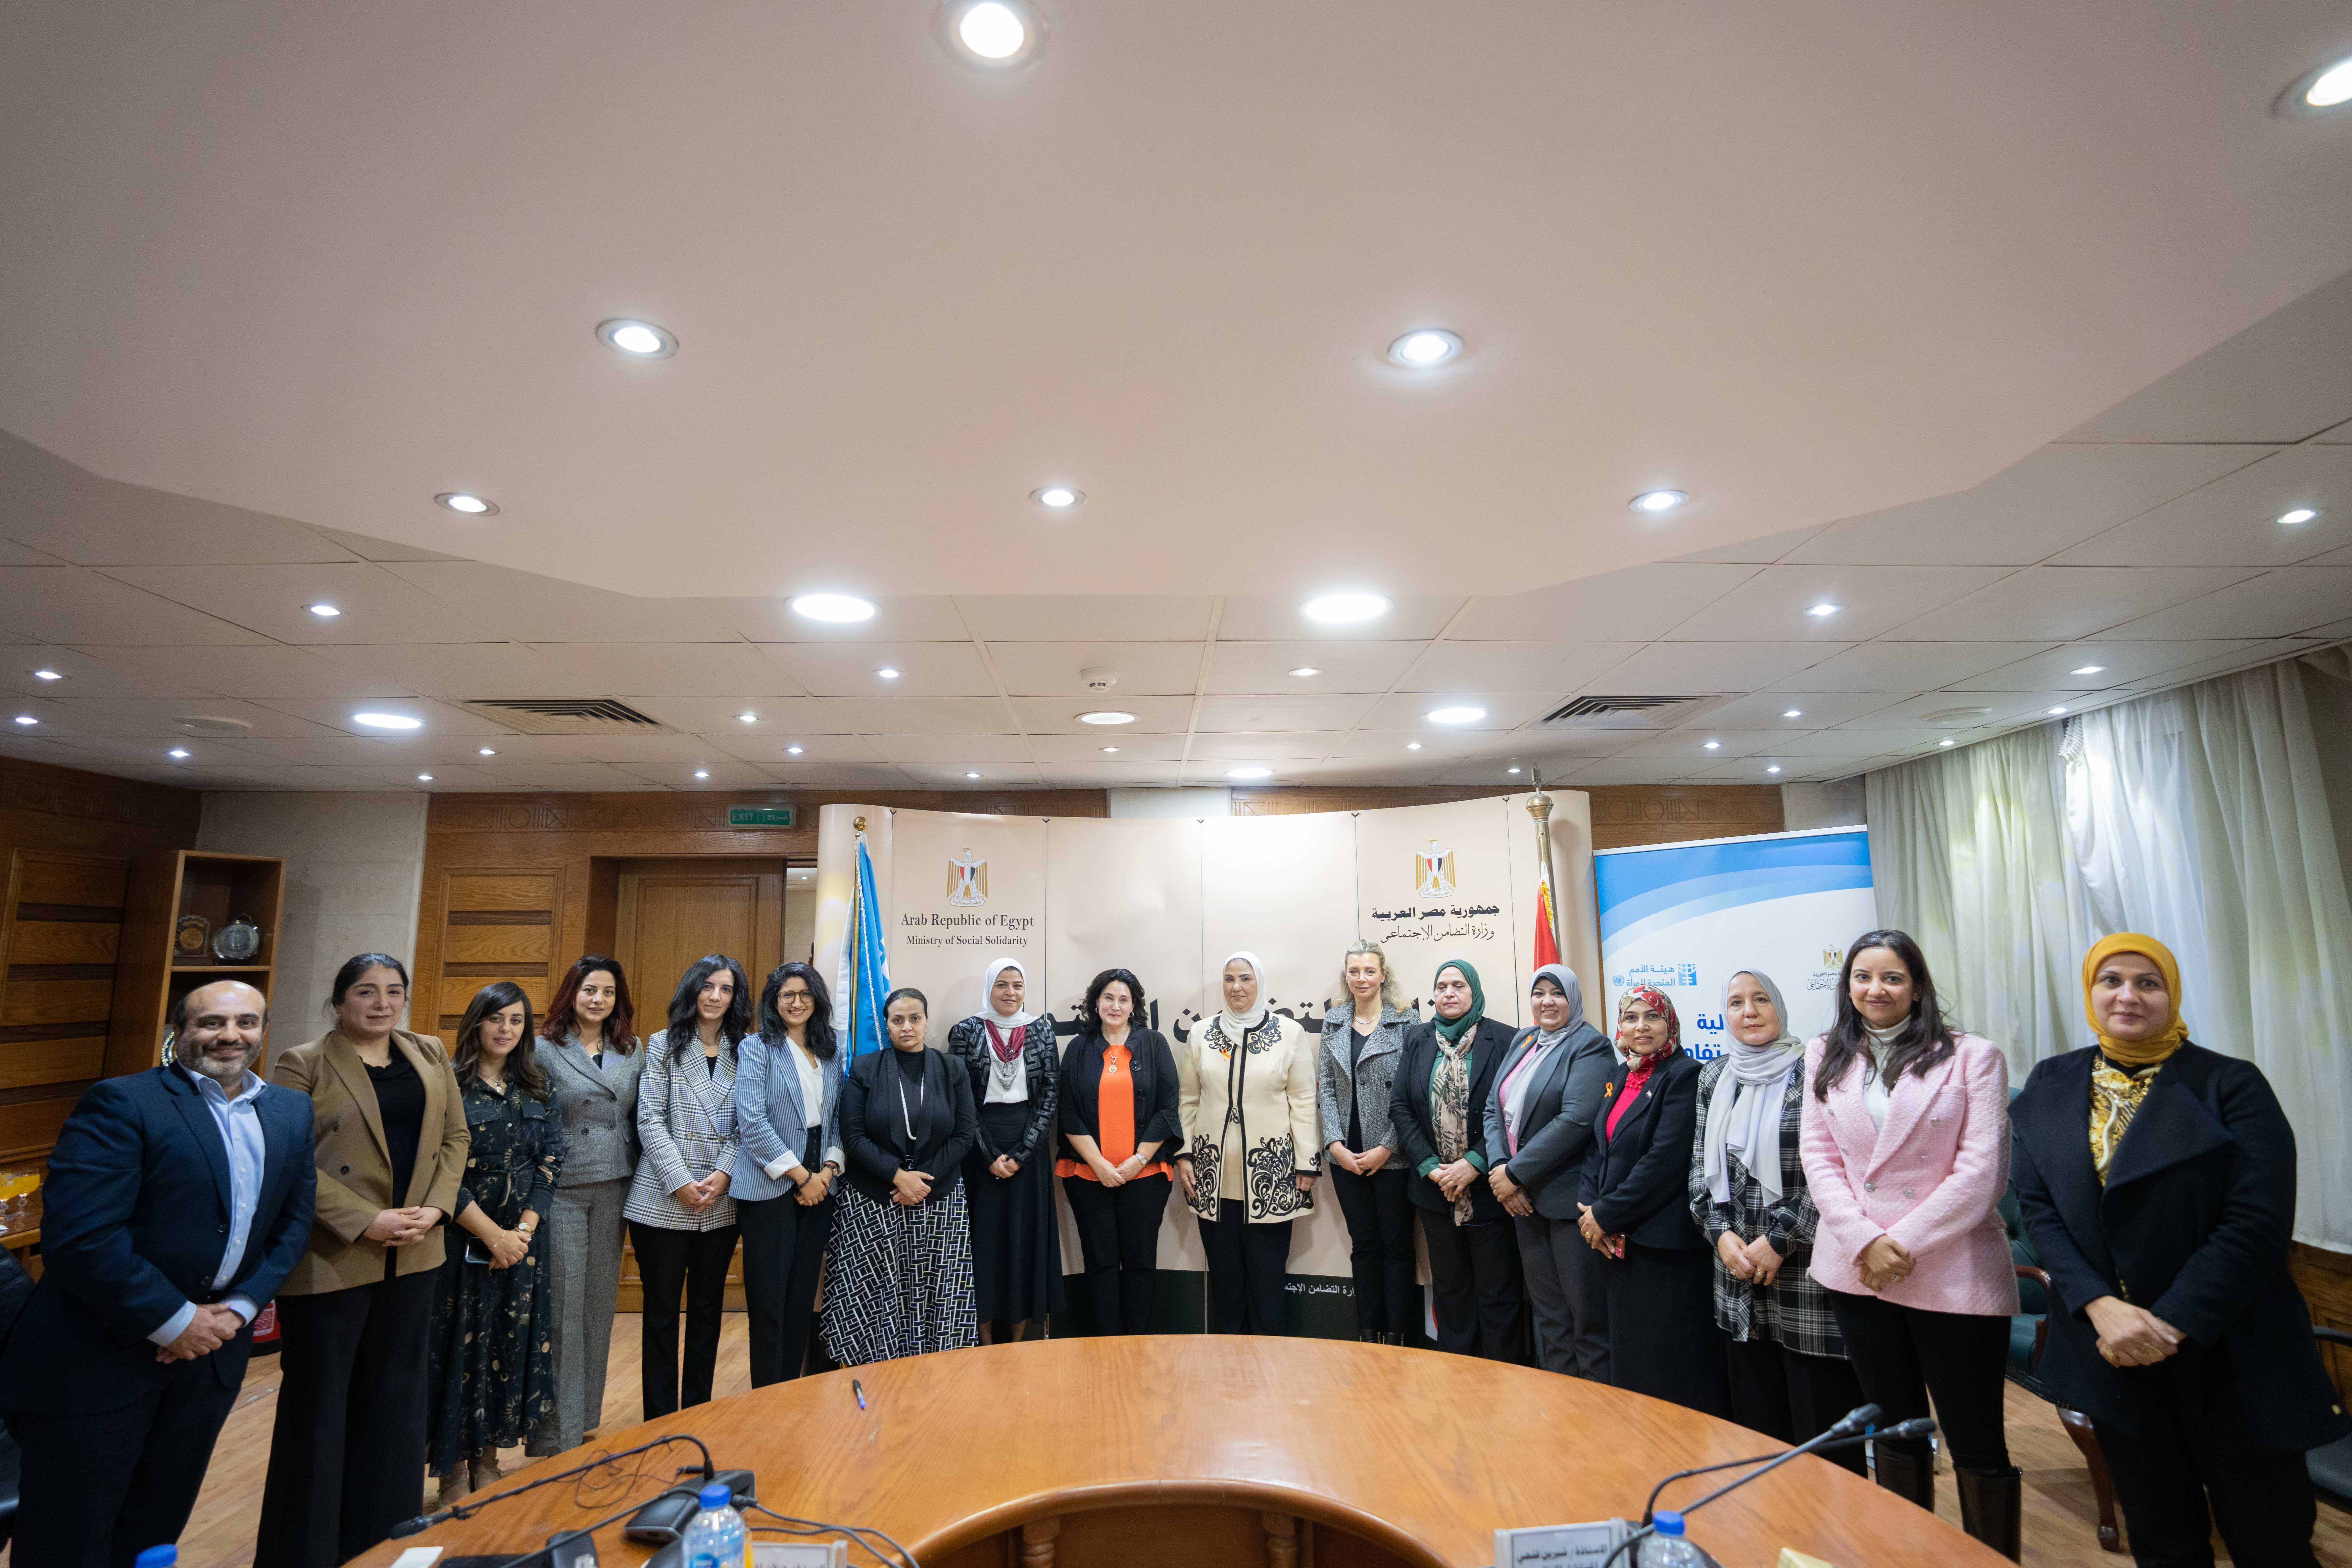 Group photo of the teams from the Ministry of Social Solidarity (MoSS) and UN Women Egypt